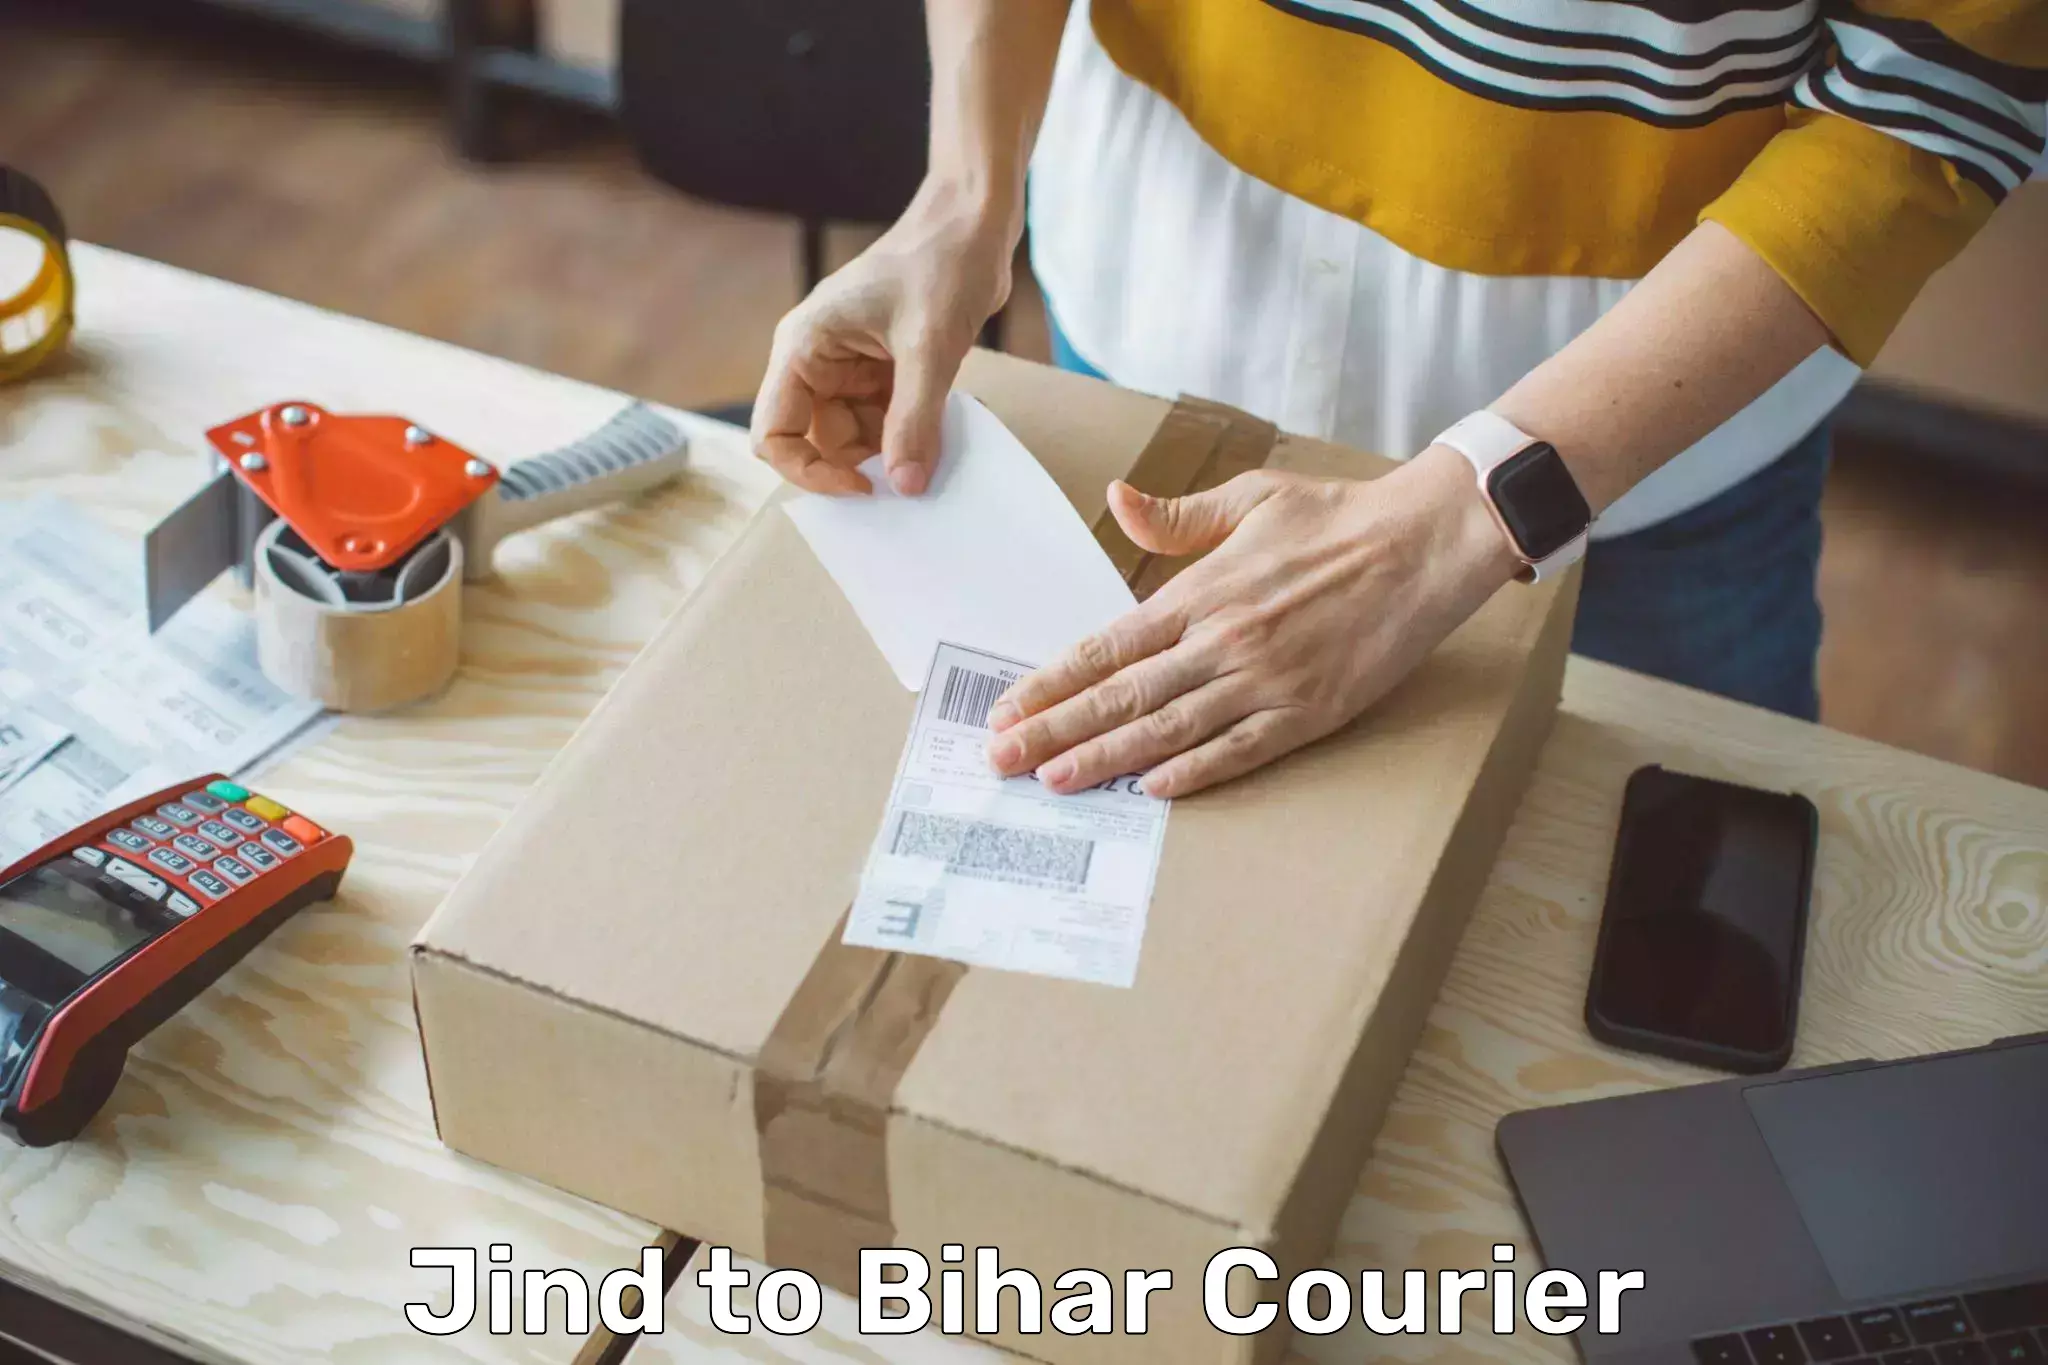 Package delivery network Jind to Aurai